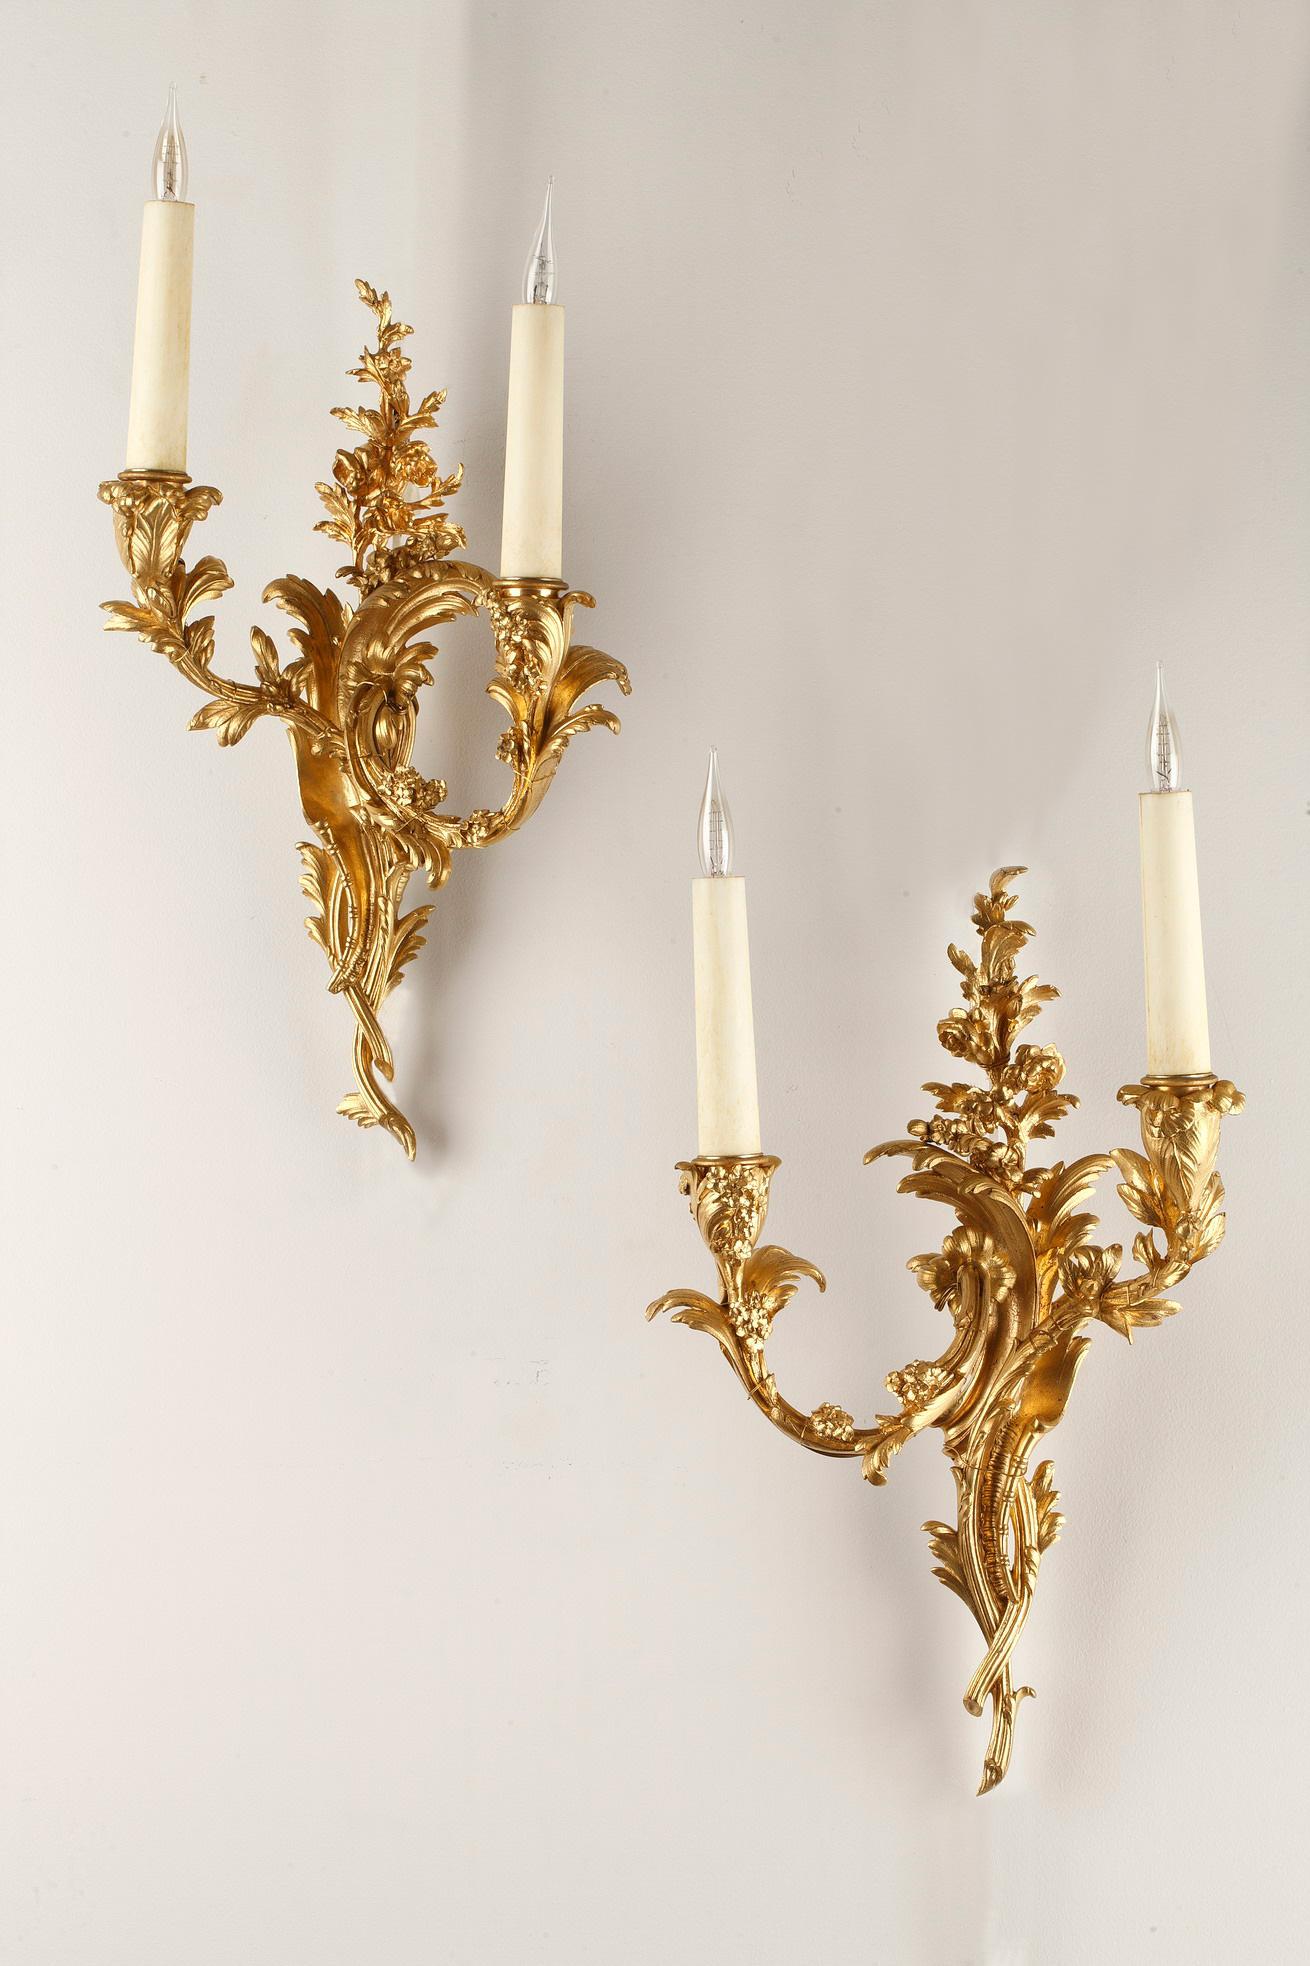 A charming pair of gilt bronze wall-lights attributed to Maison Millet, with two light-arms with leaves and flowers, issuing from a central barrel of foliage and stem and finishing in a delicate floral grouping.

The firm of Millet T. was founded in